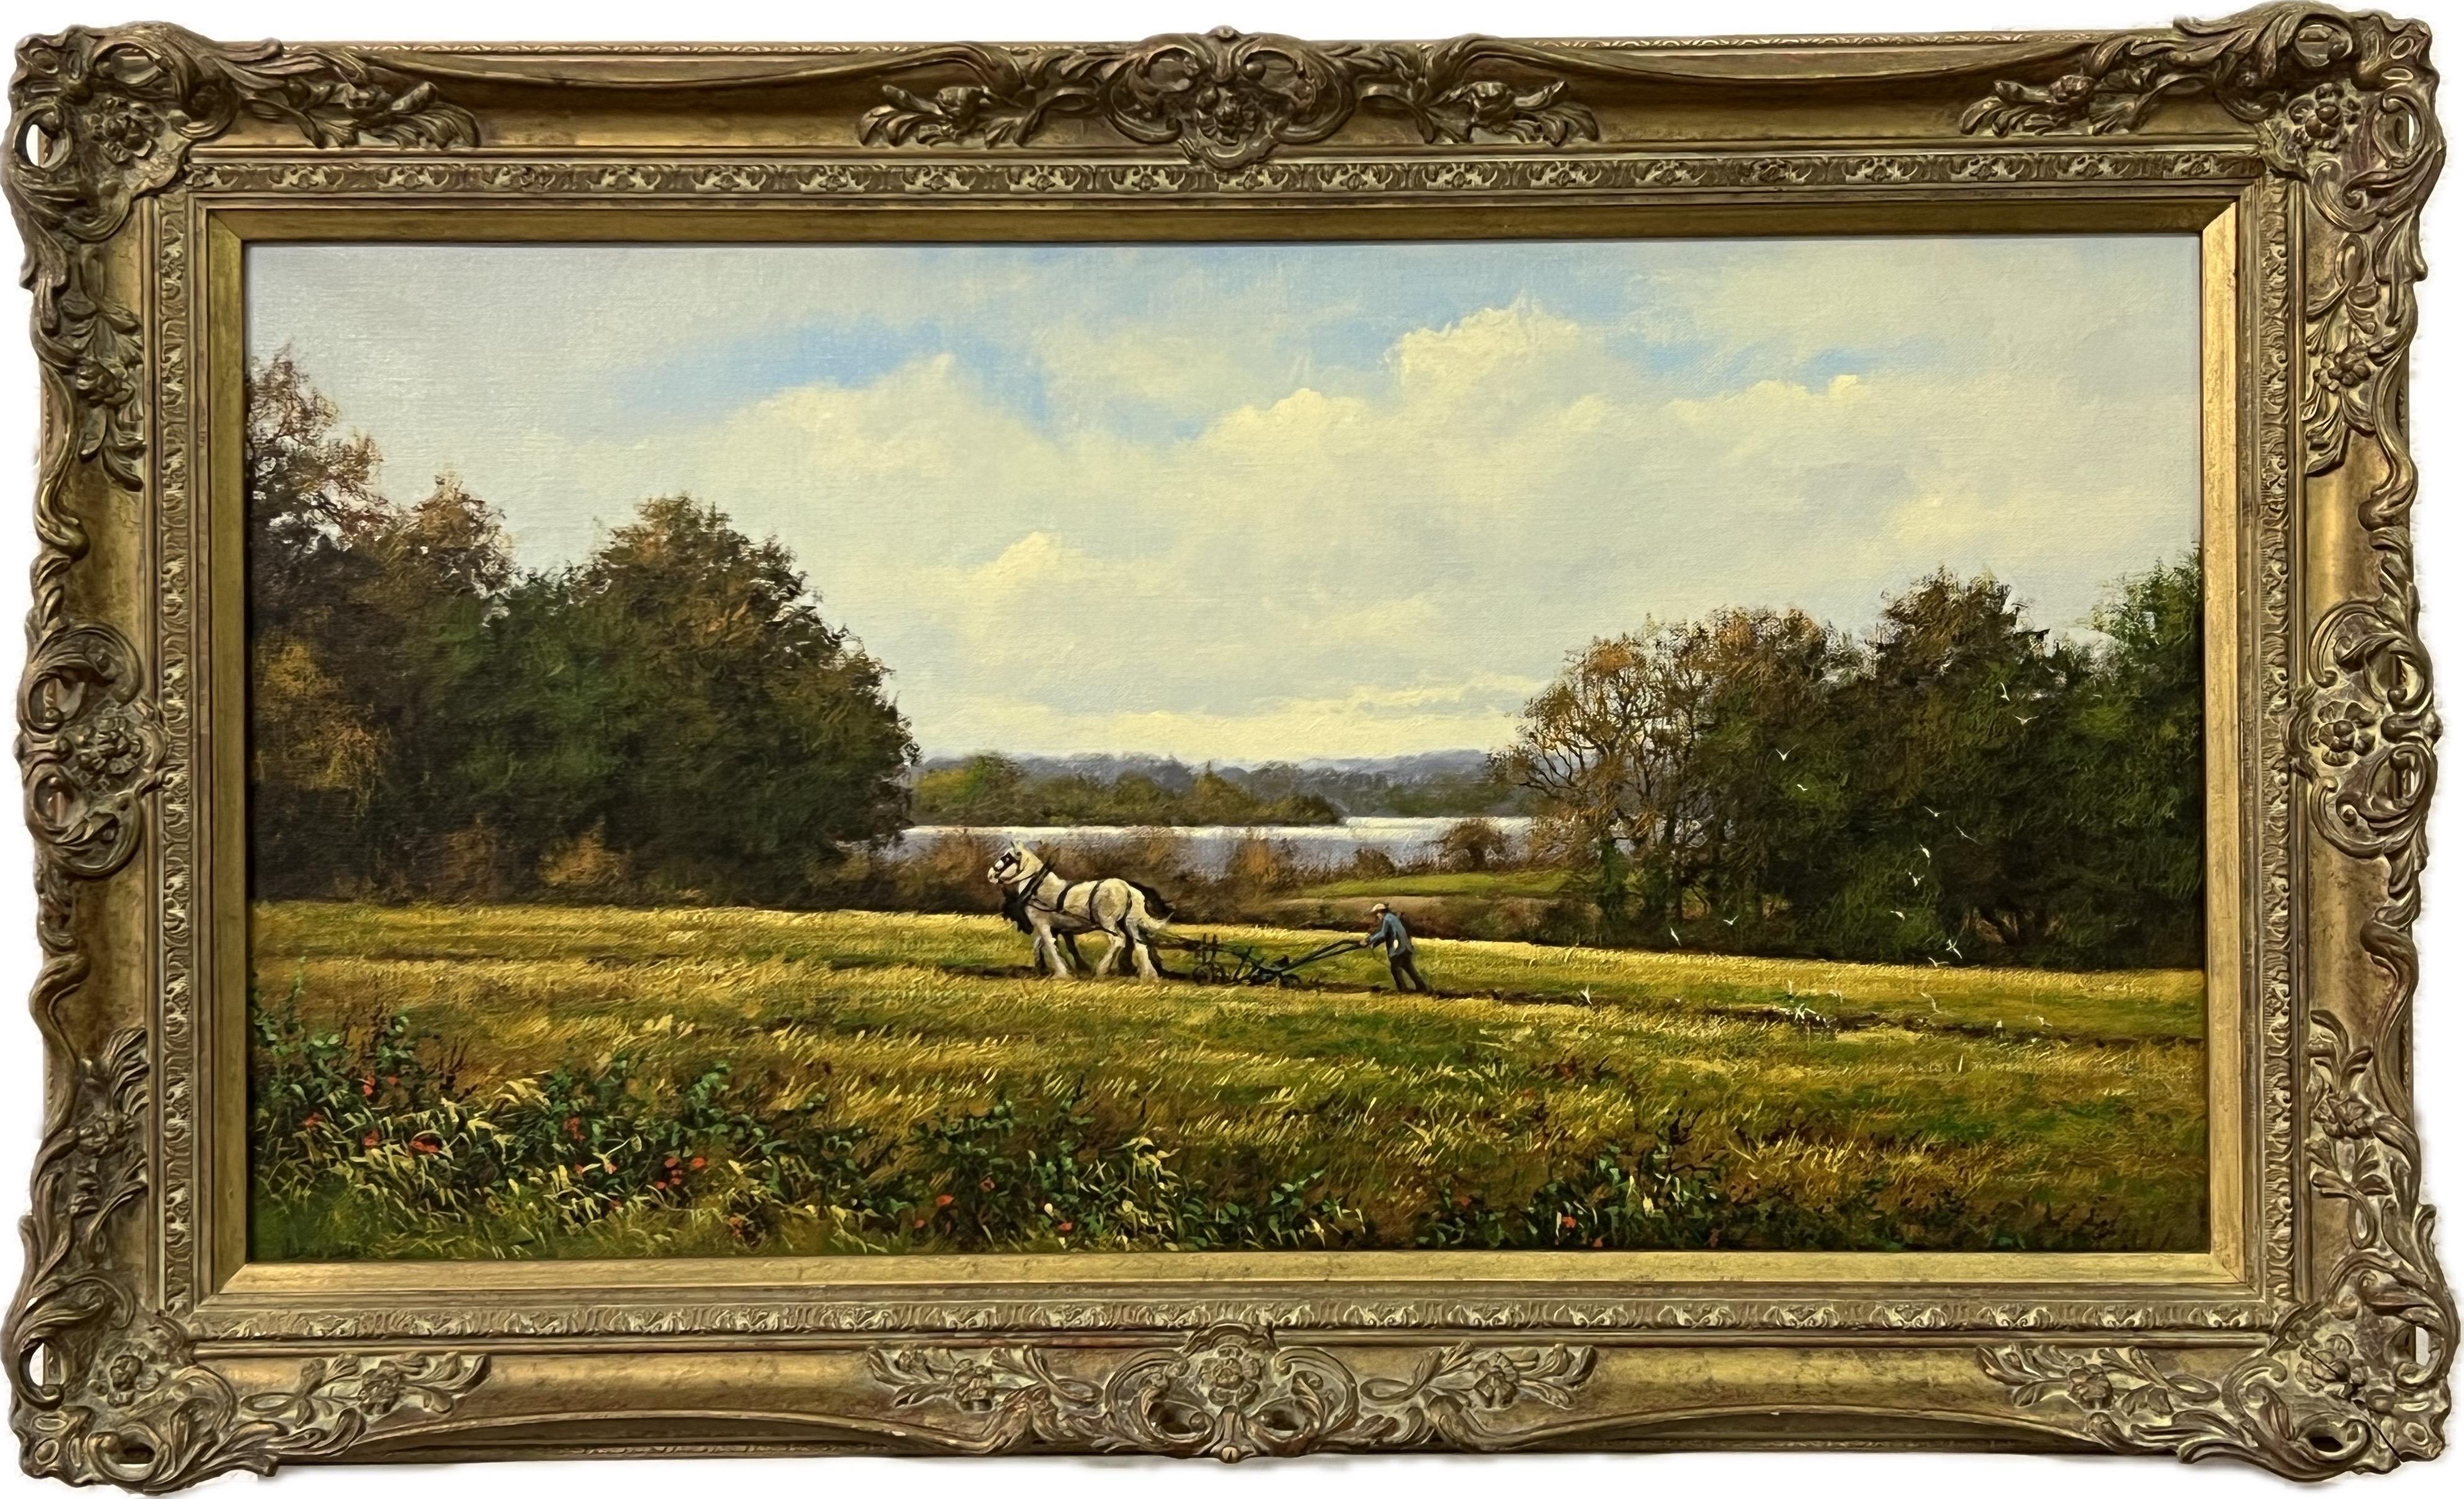 Oil Painting of English Countryside with Horses & Ploughman by British Artist